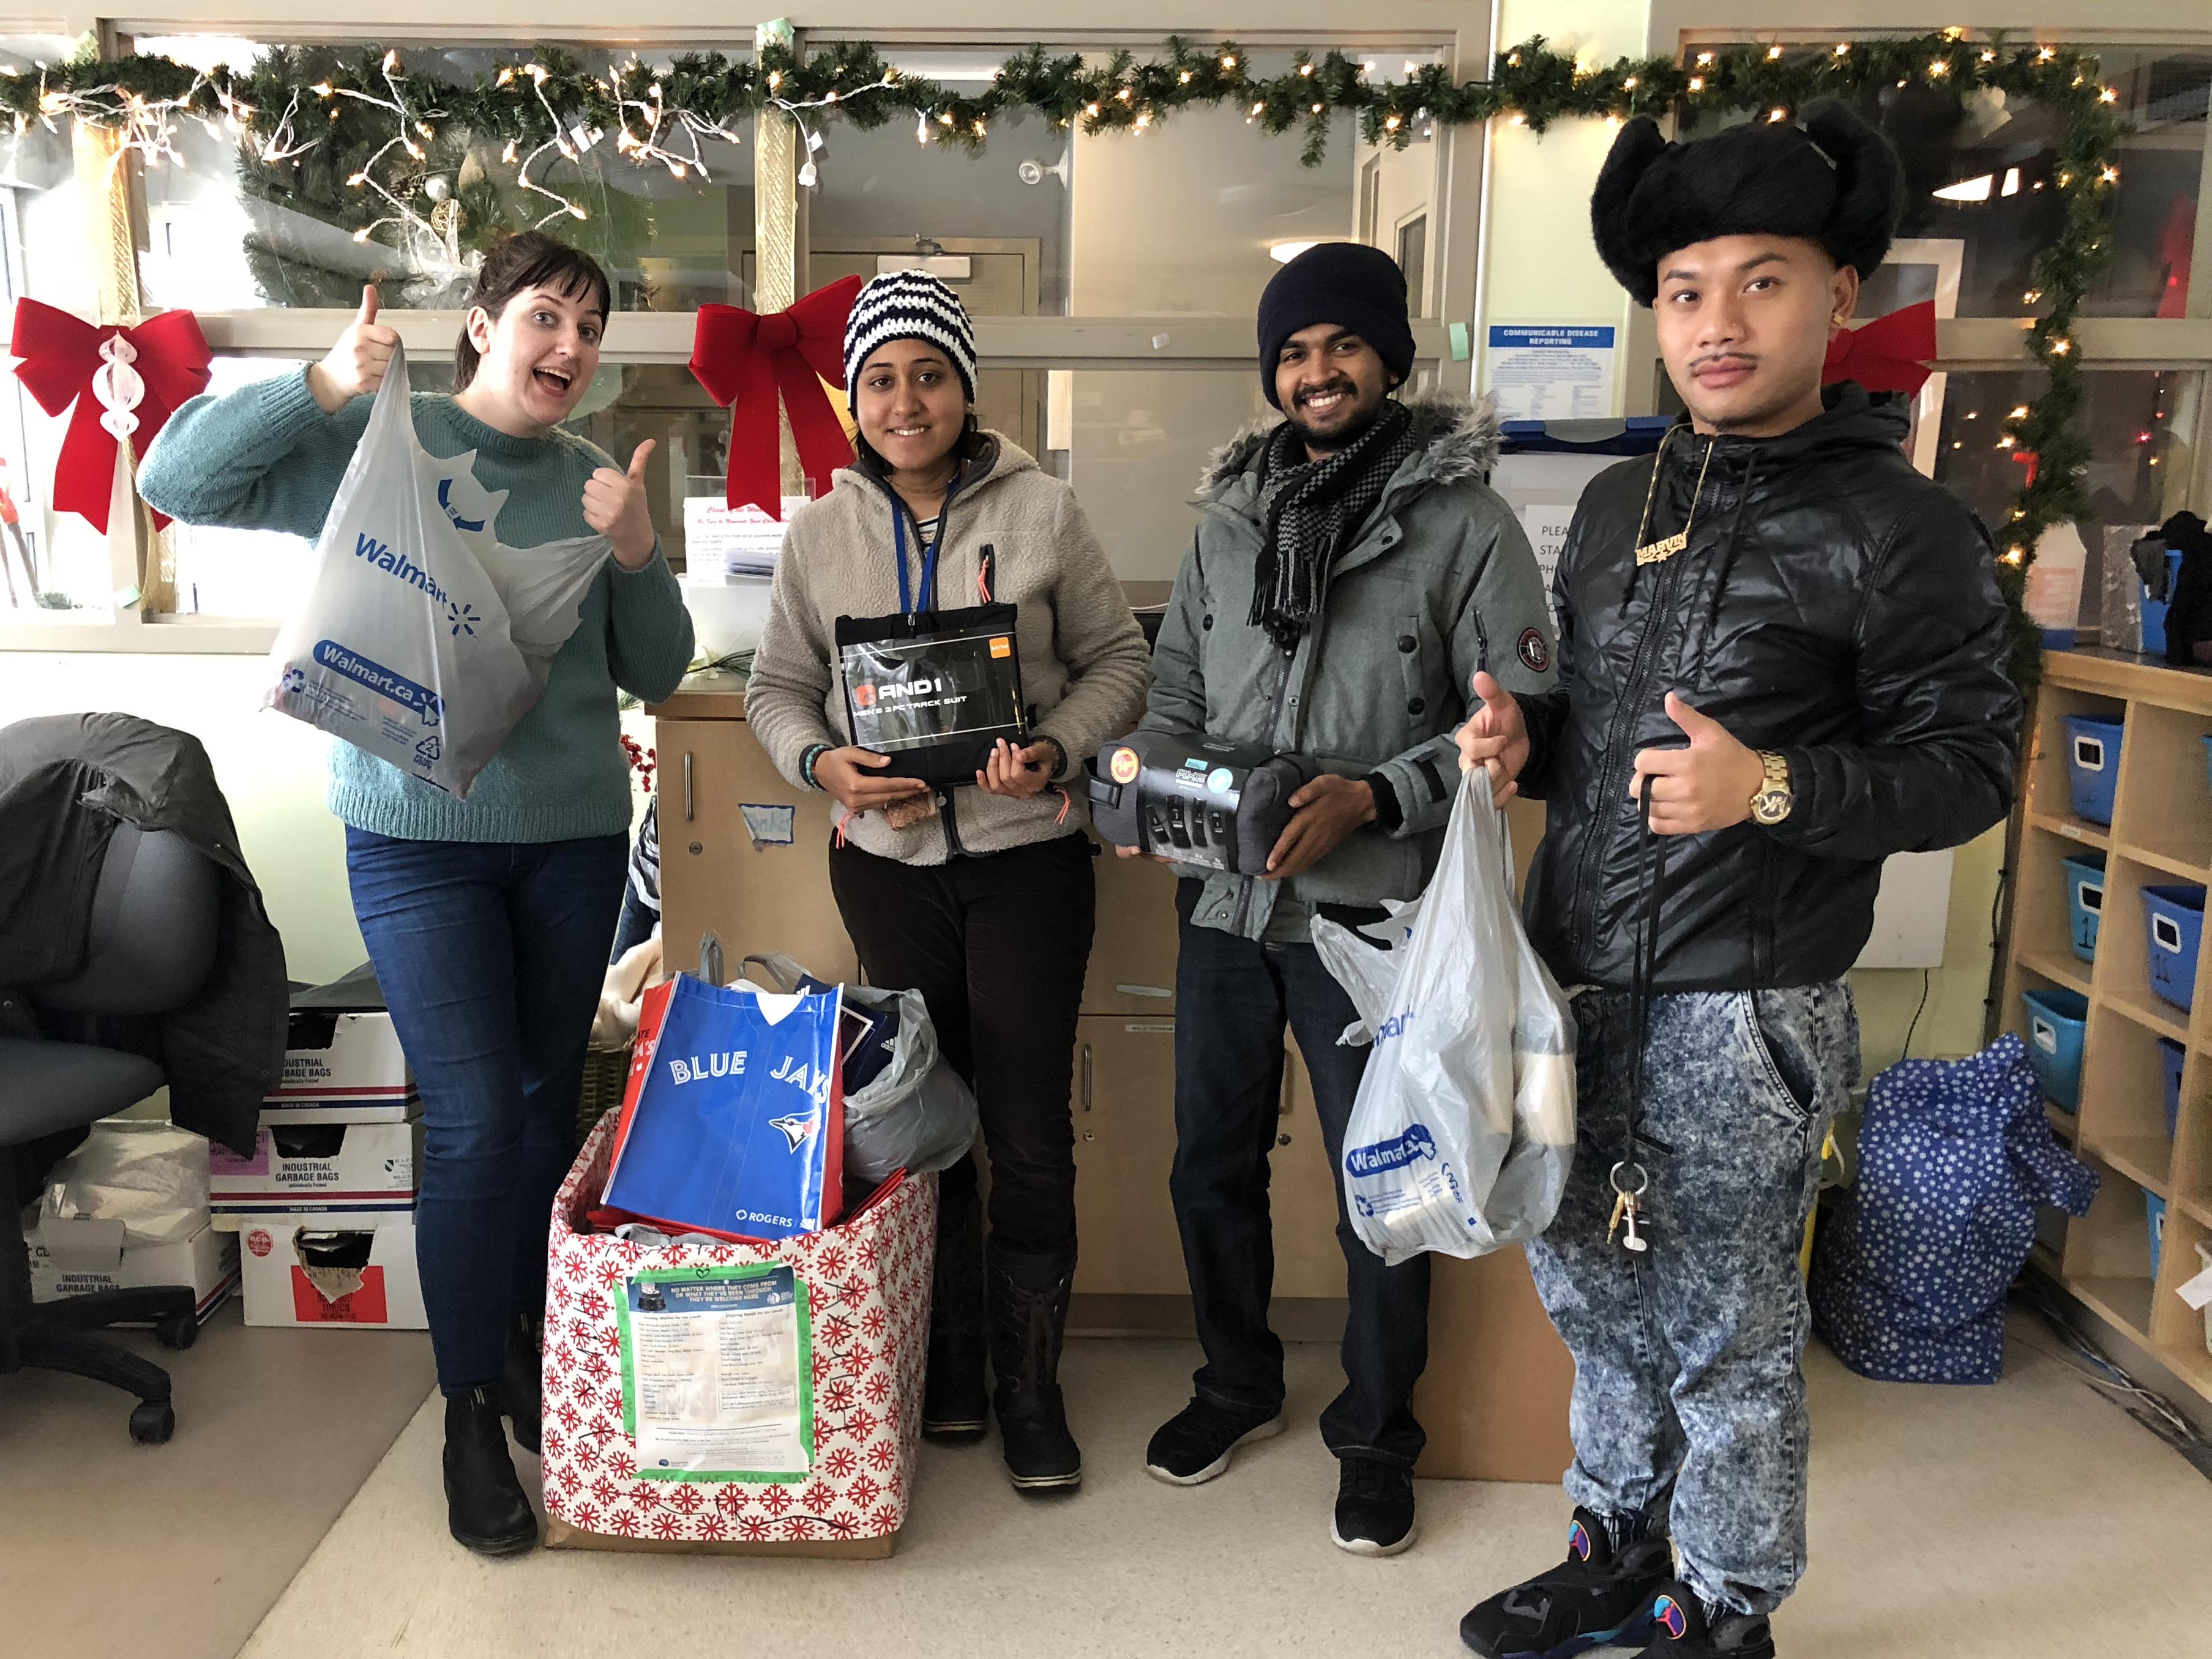 AYUDH Toronto members giving donations to Youth Without Shelter staff